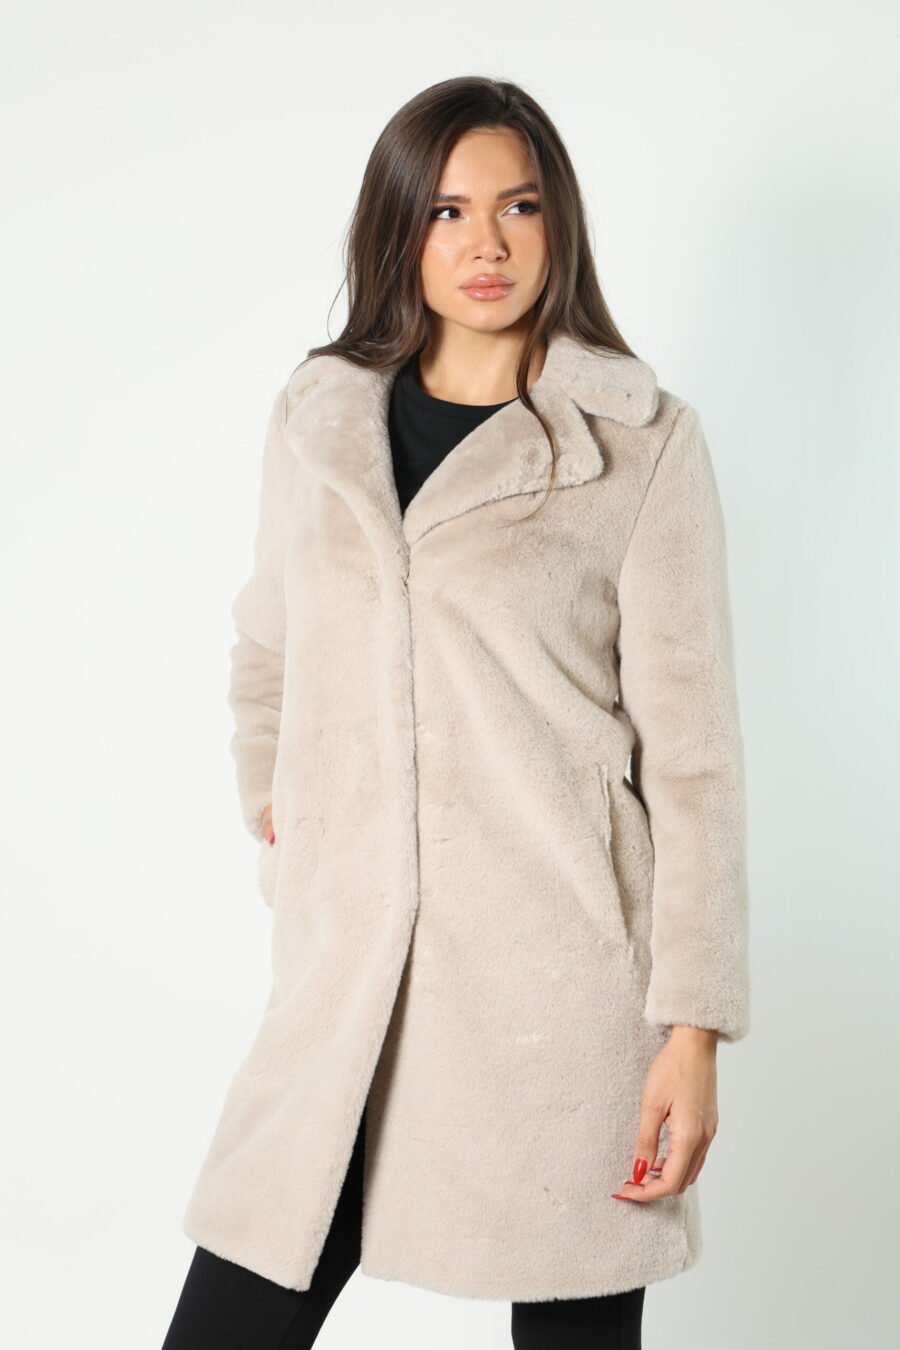 White curly faux fur coat with printed inner lining - 8052865435499 192 scaled